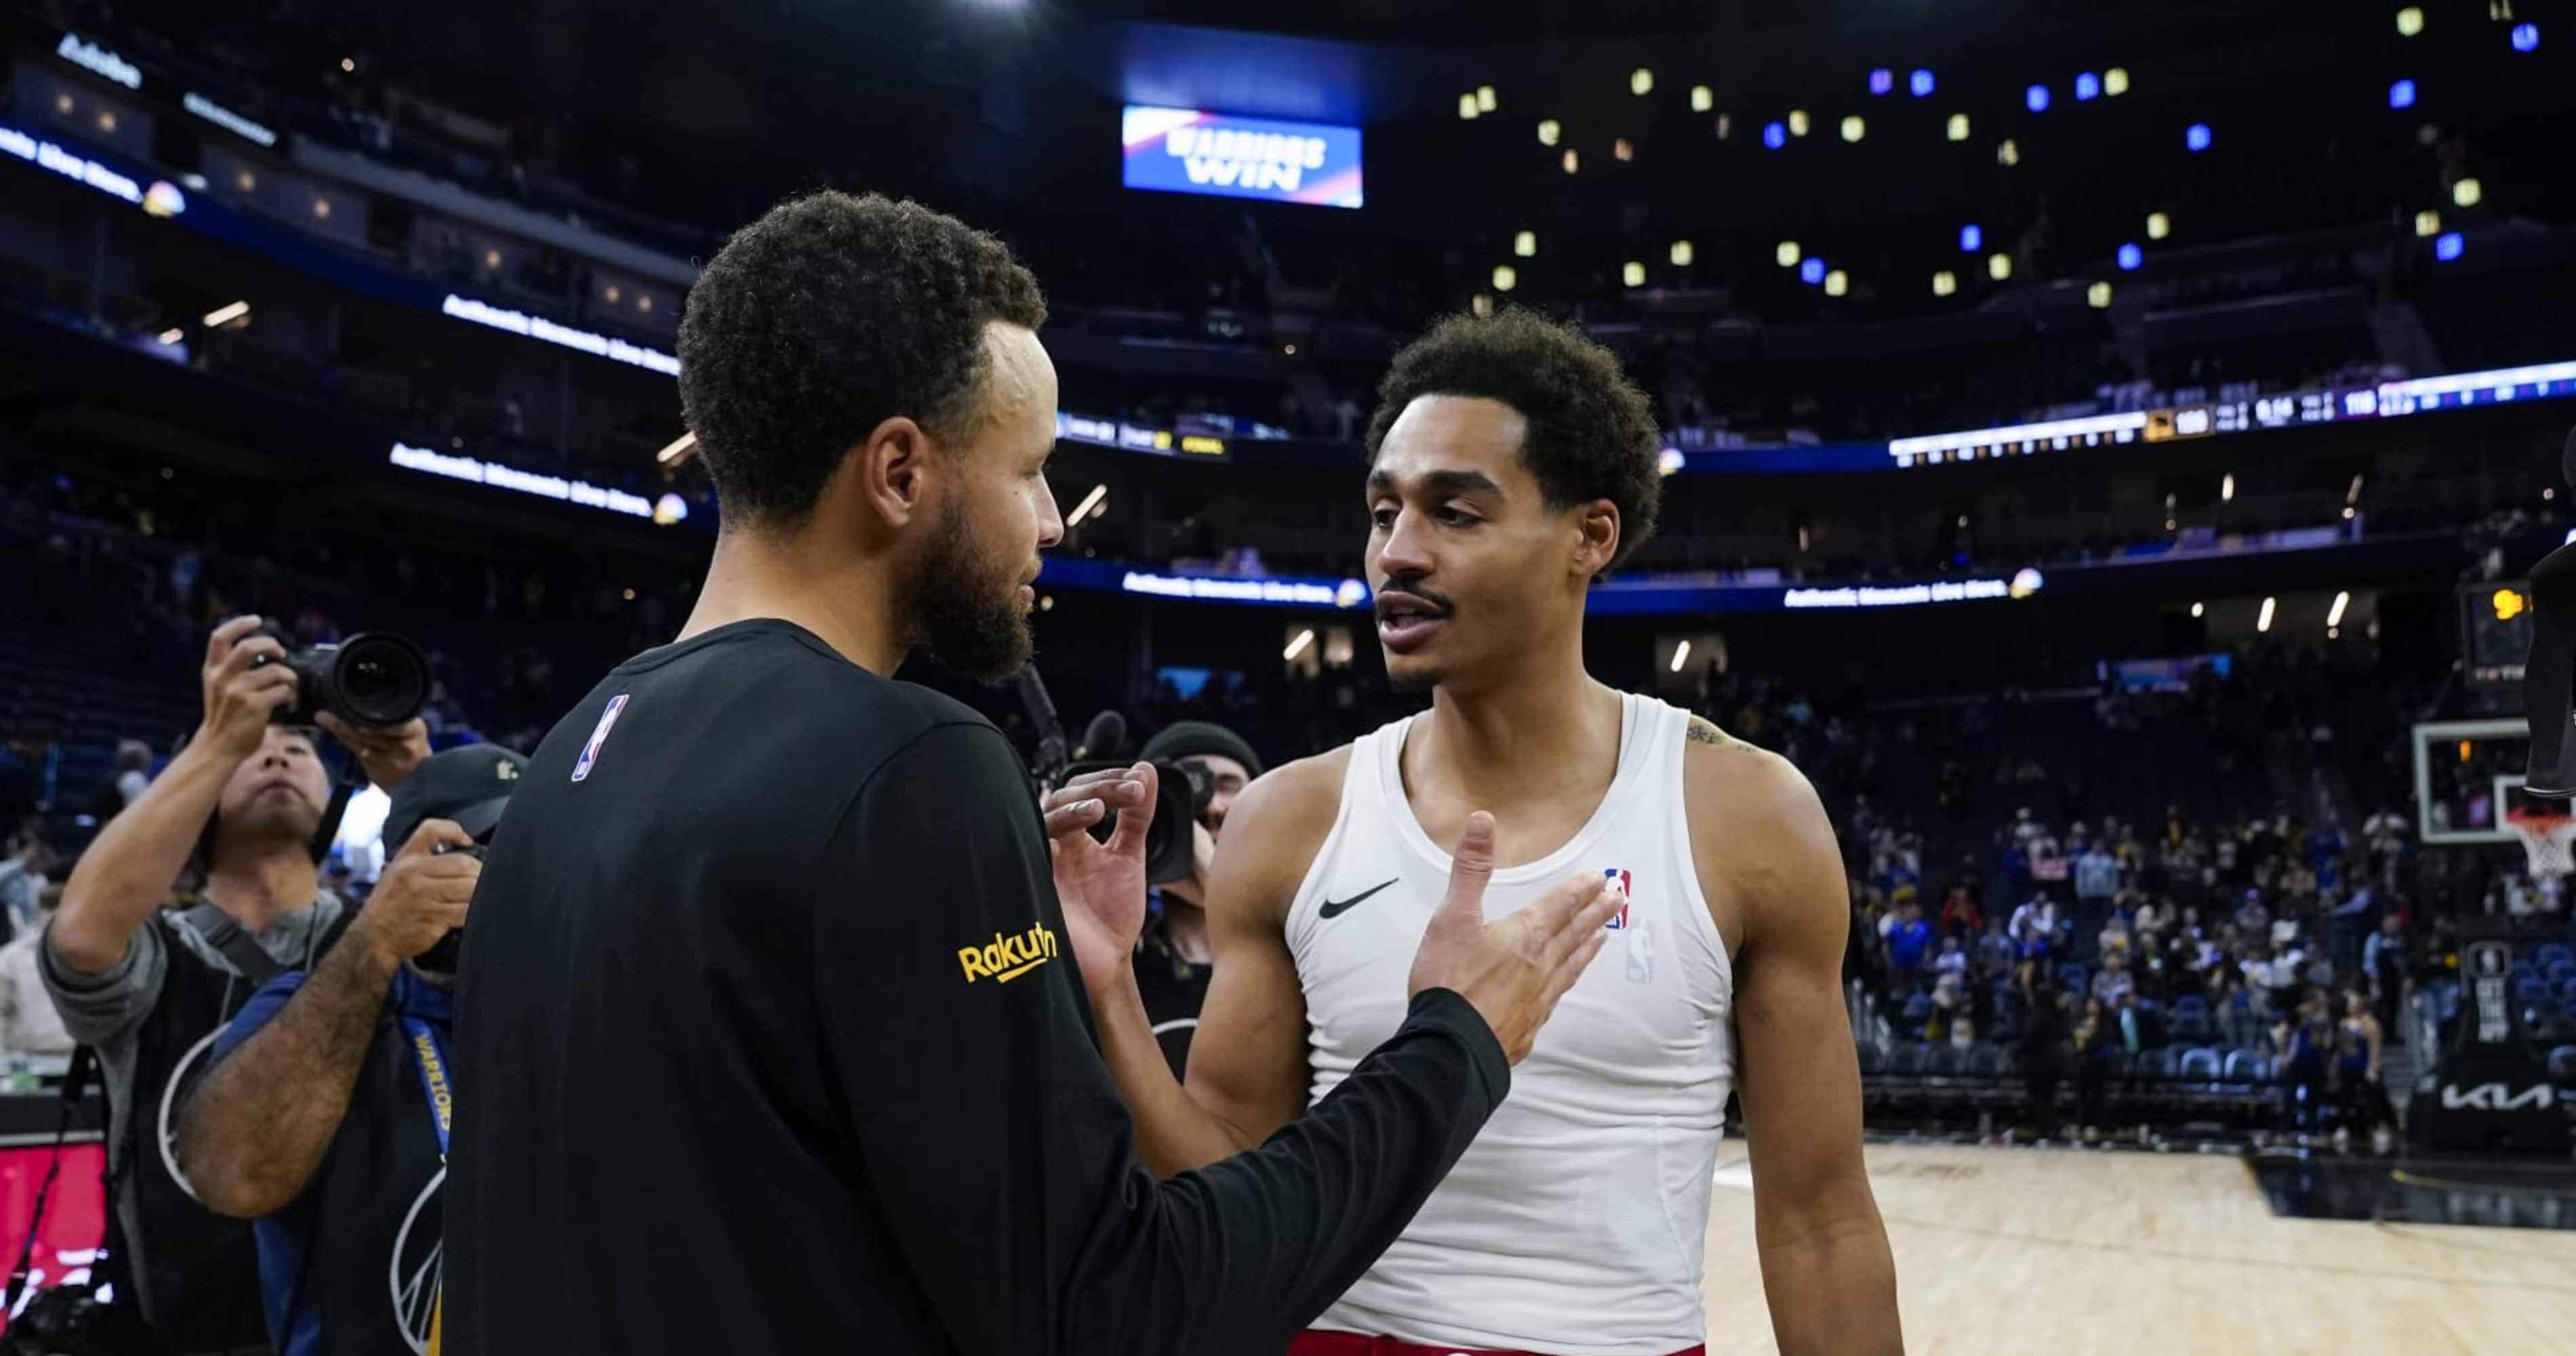 Jordan Poole looks at bright side of Wizards tenure after $140,000,000  contract and NBA title: Can play my type of basketball